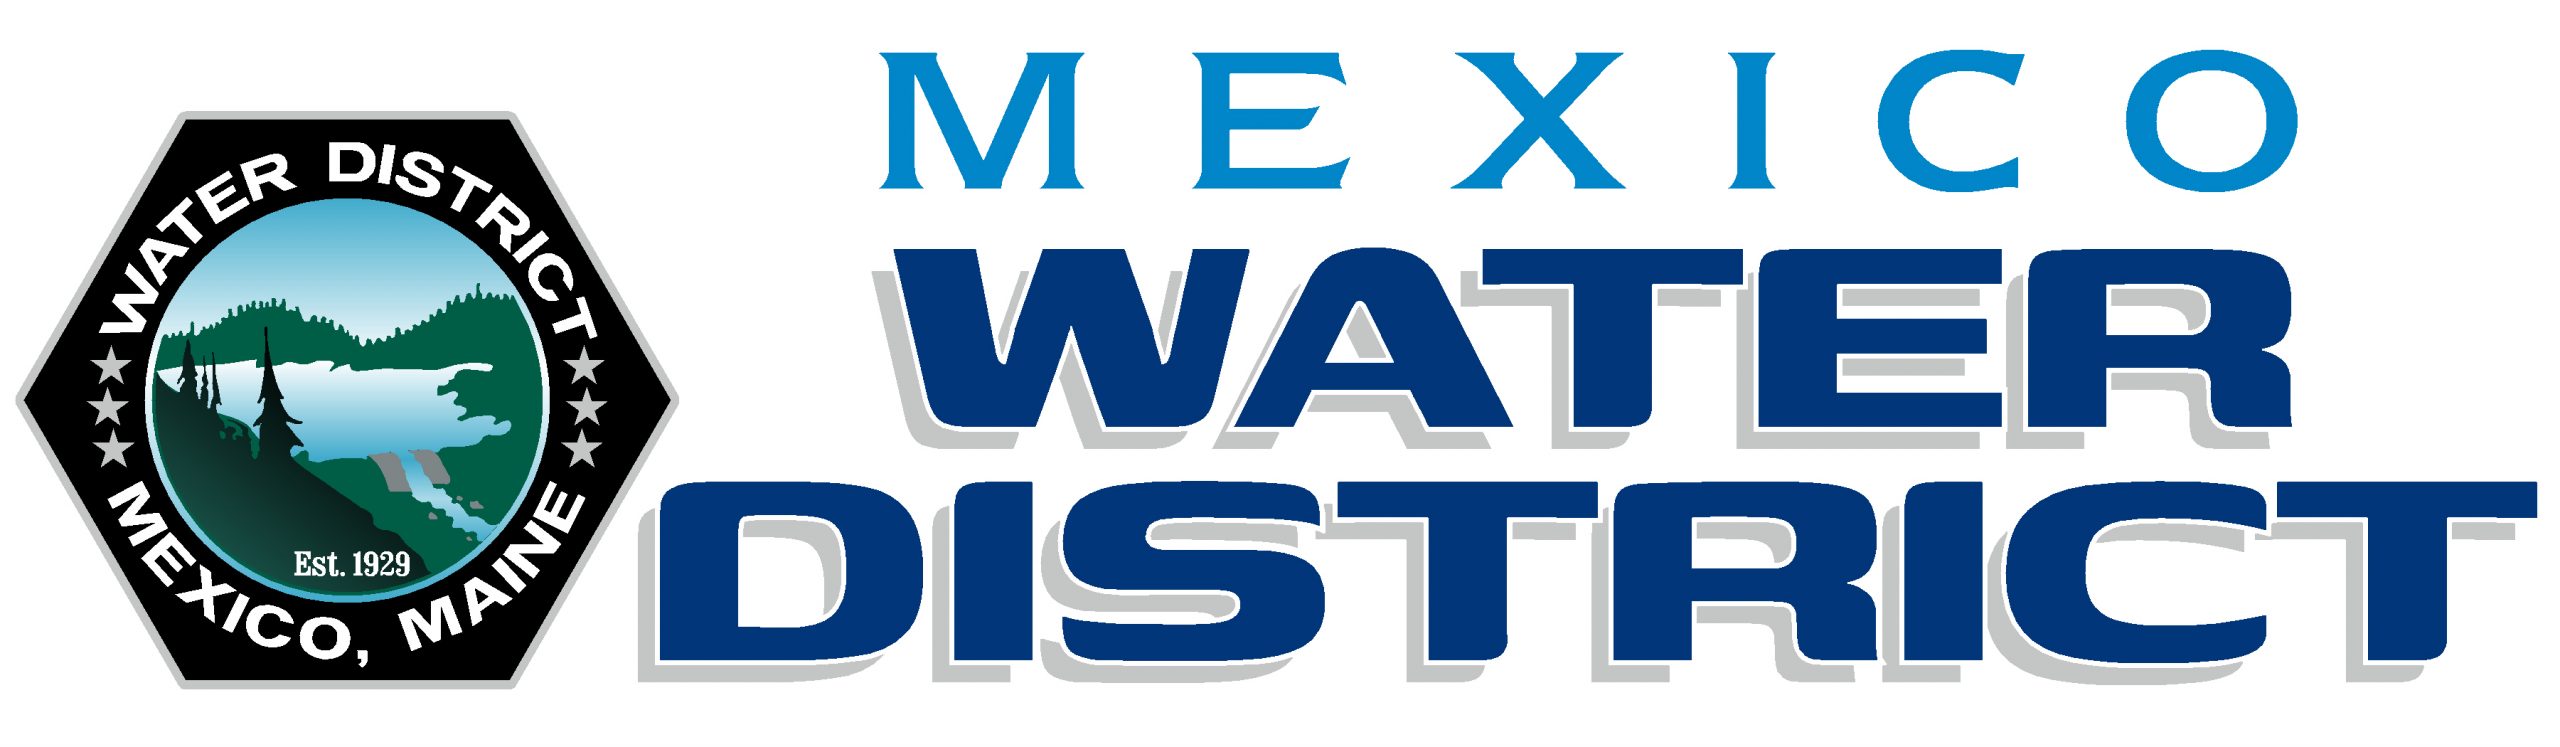 Mexico Water District